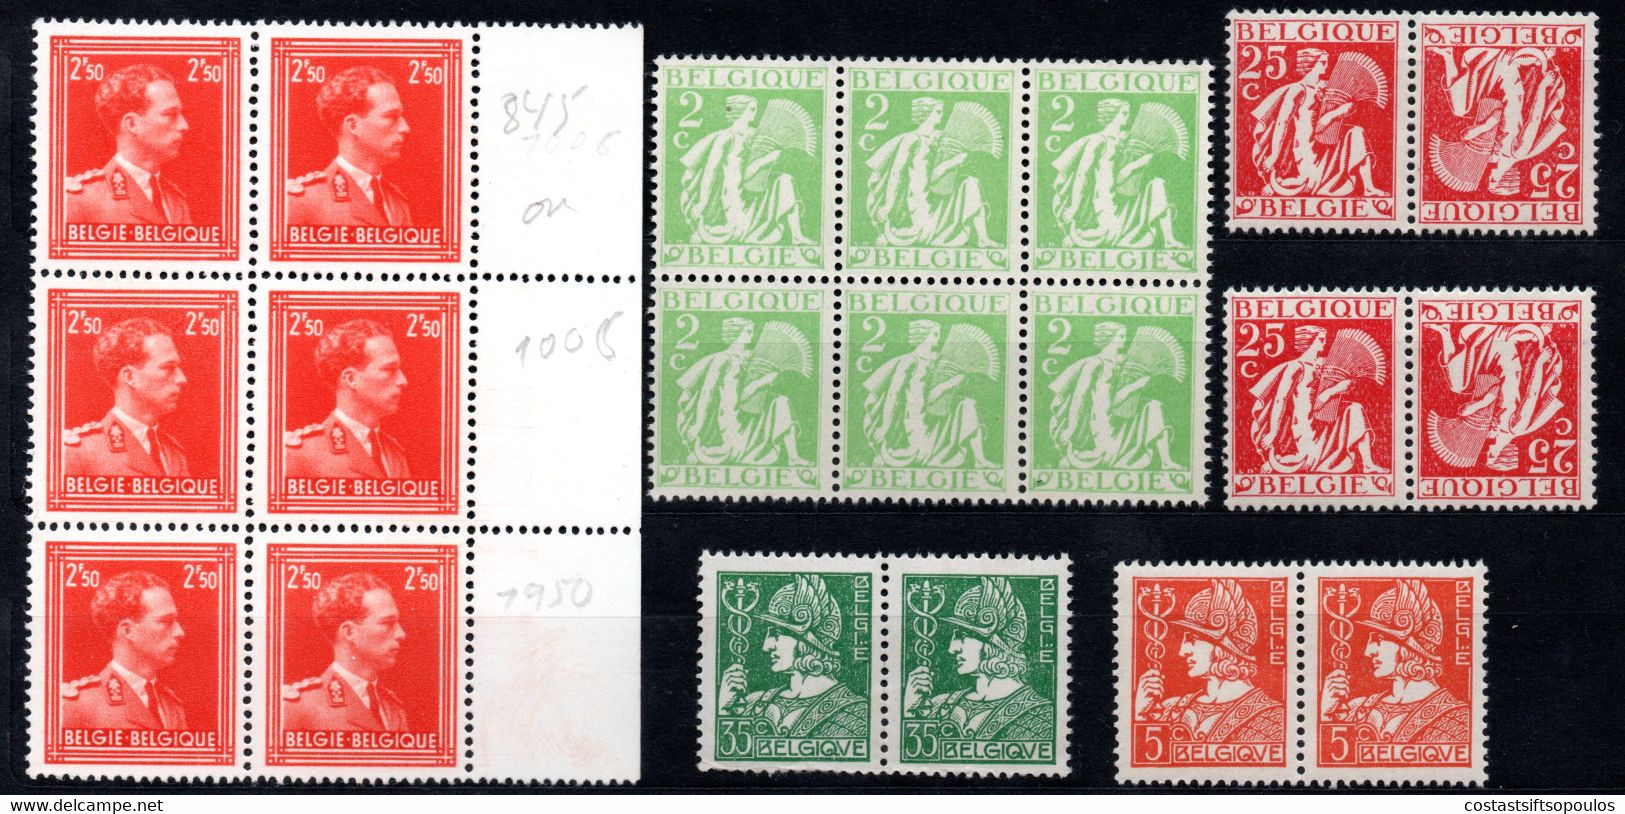 1327. BELGIUM. 1932-1956, GLEANER, MERCURY, KING LEOPOLD III MNH LOT (2 PAGES) 9 SCANS